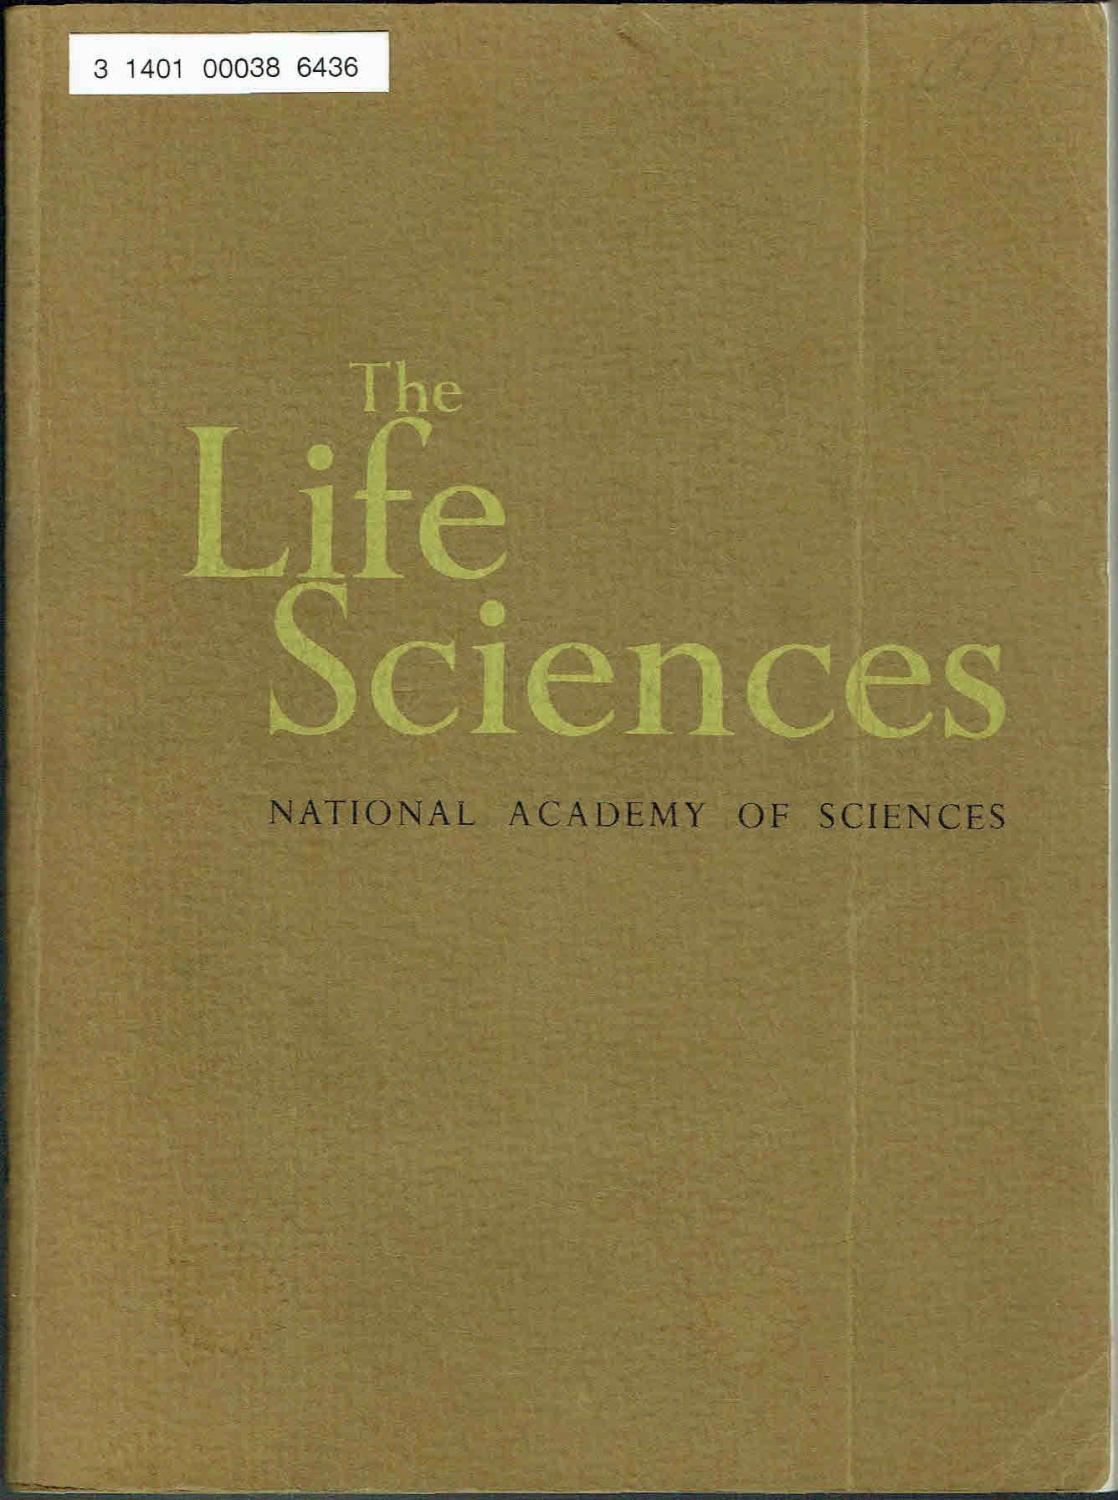 The LIFE SCIENCES - Committee on Science and Public Policy; Philip Handler (Chairman); et al.